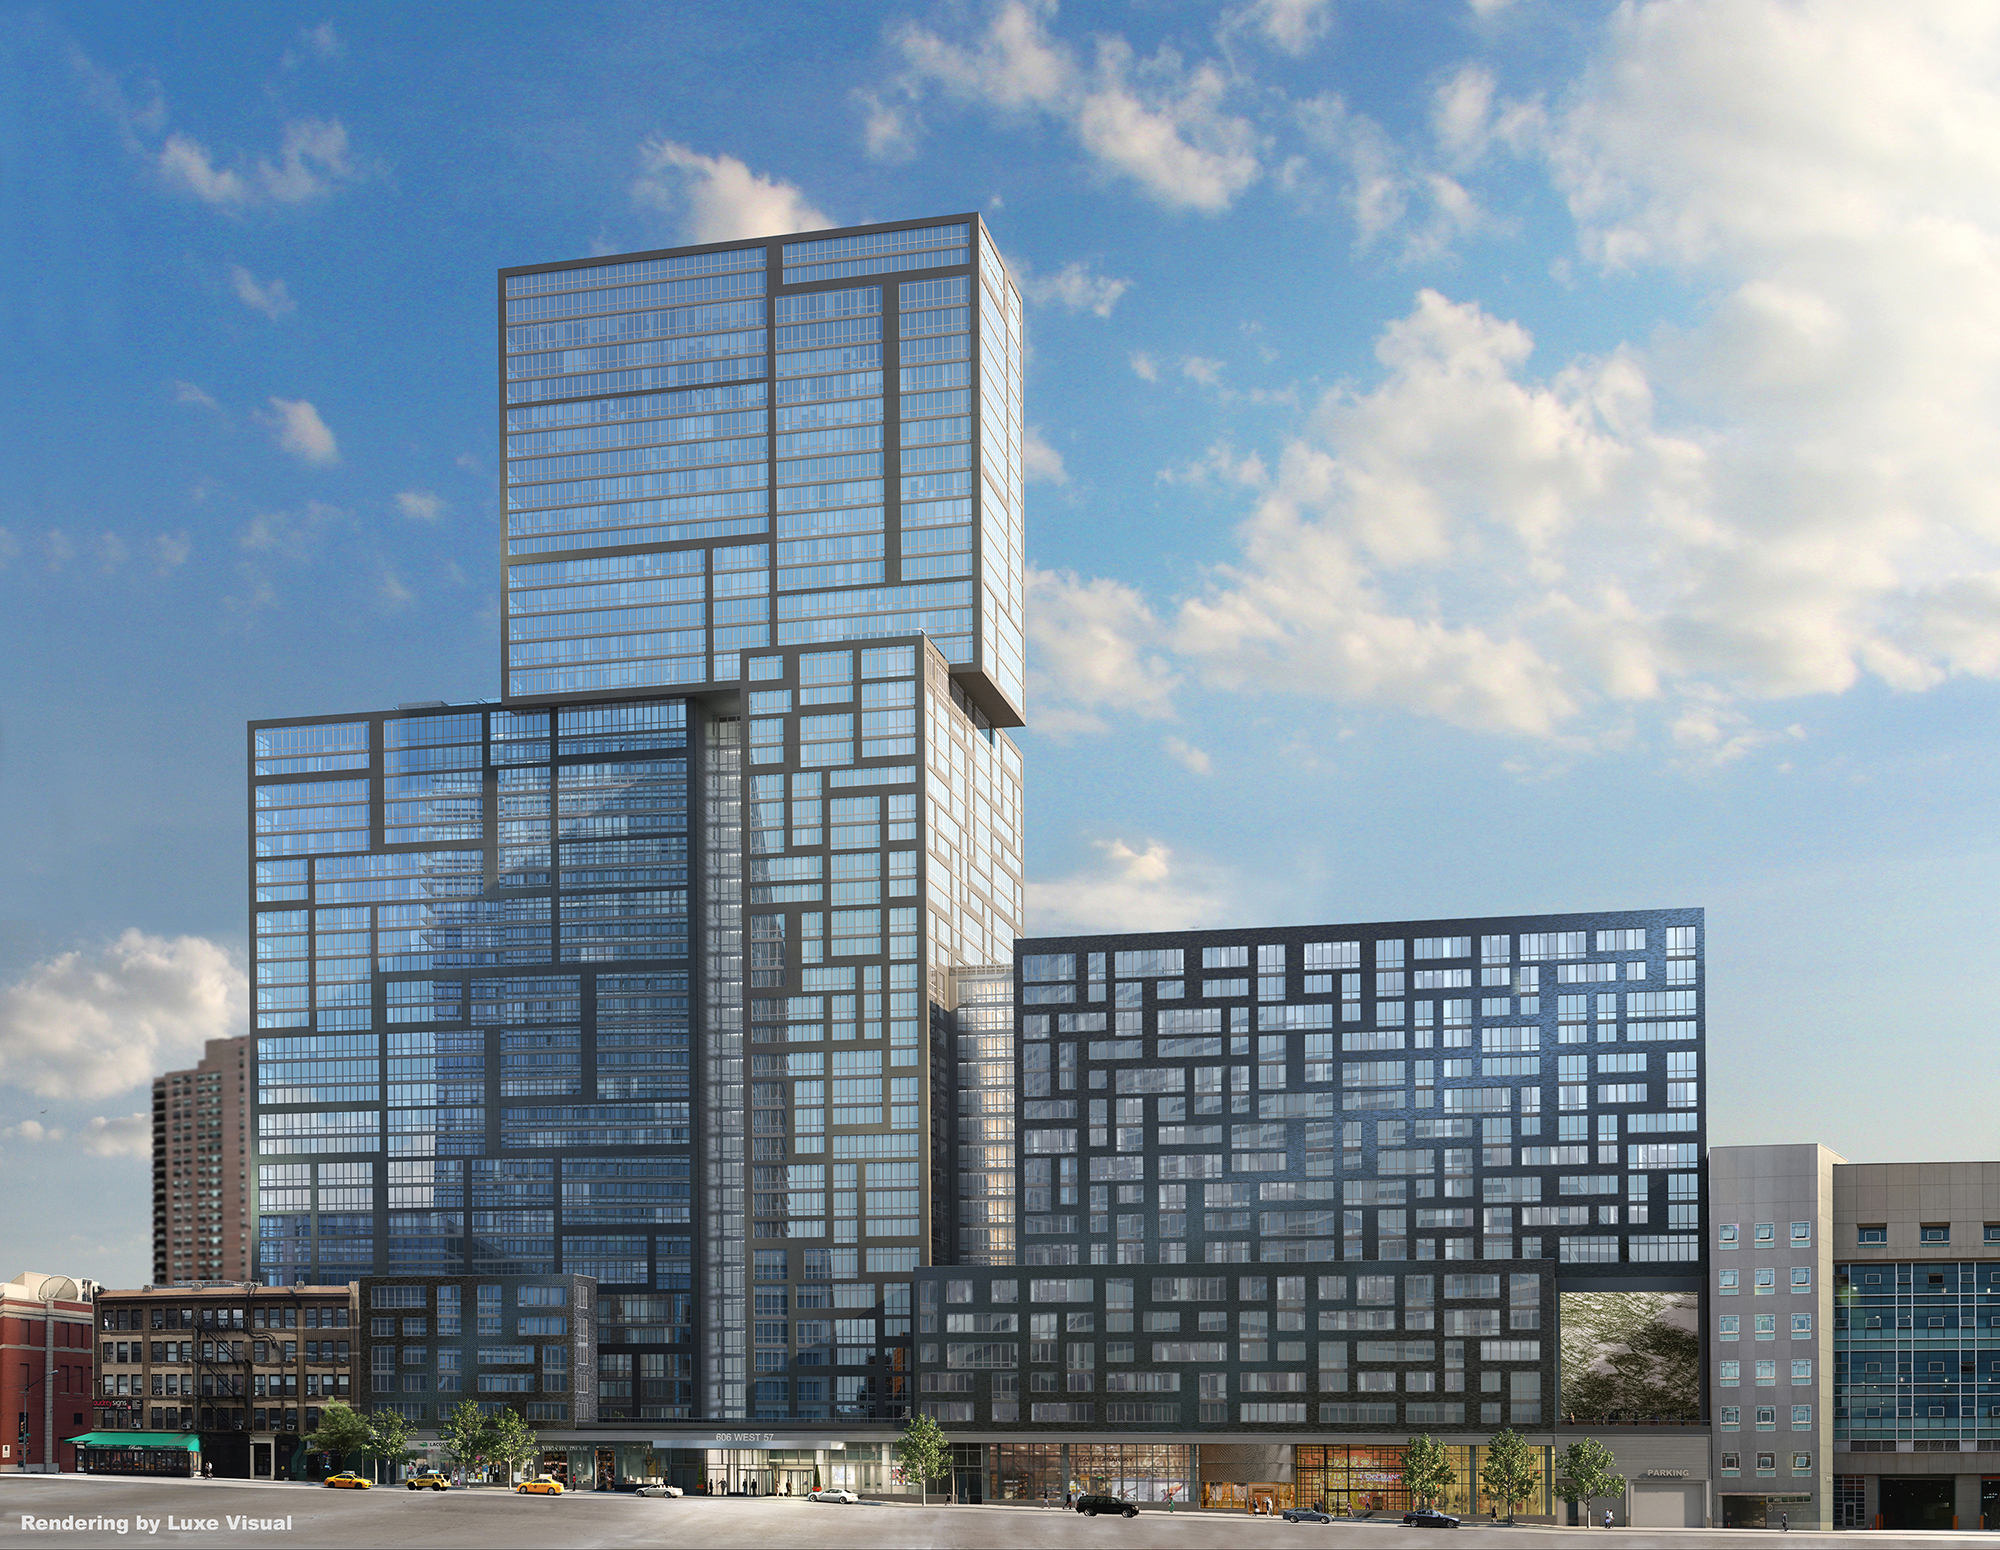 Rendering of 606 West 57th Street. Via SLCE Architects